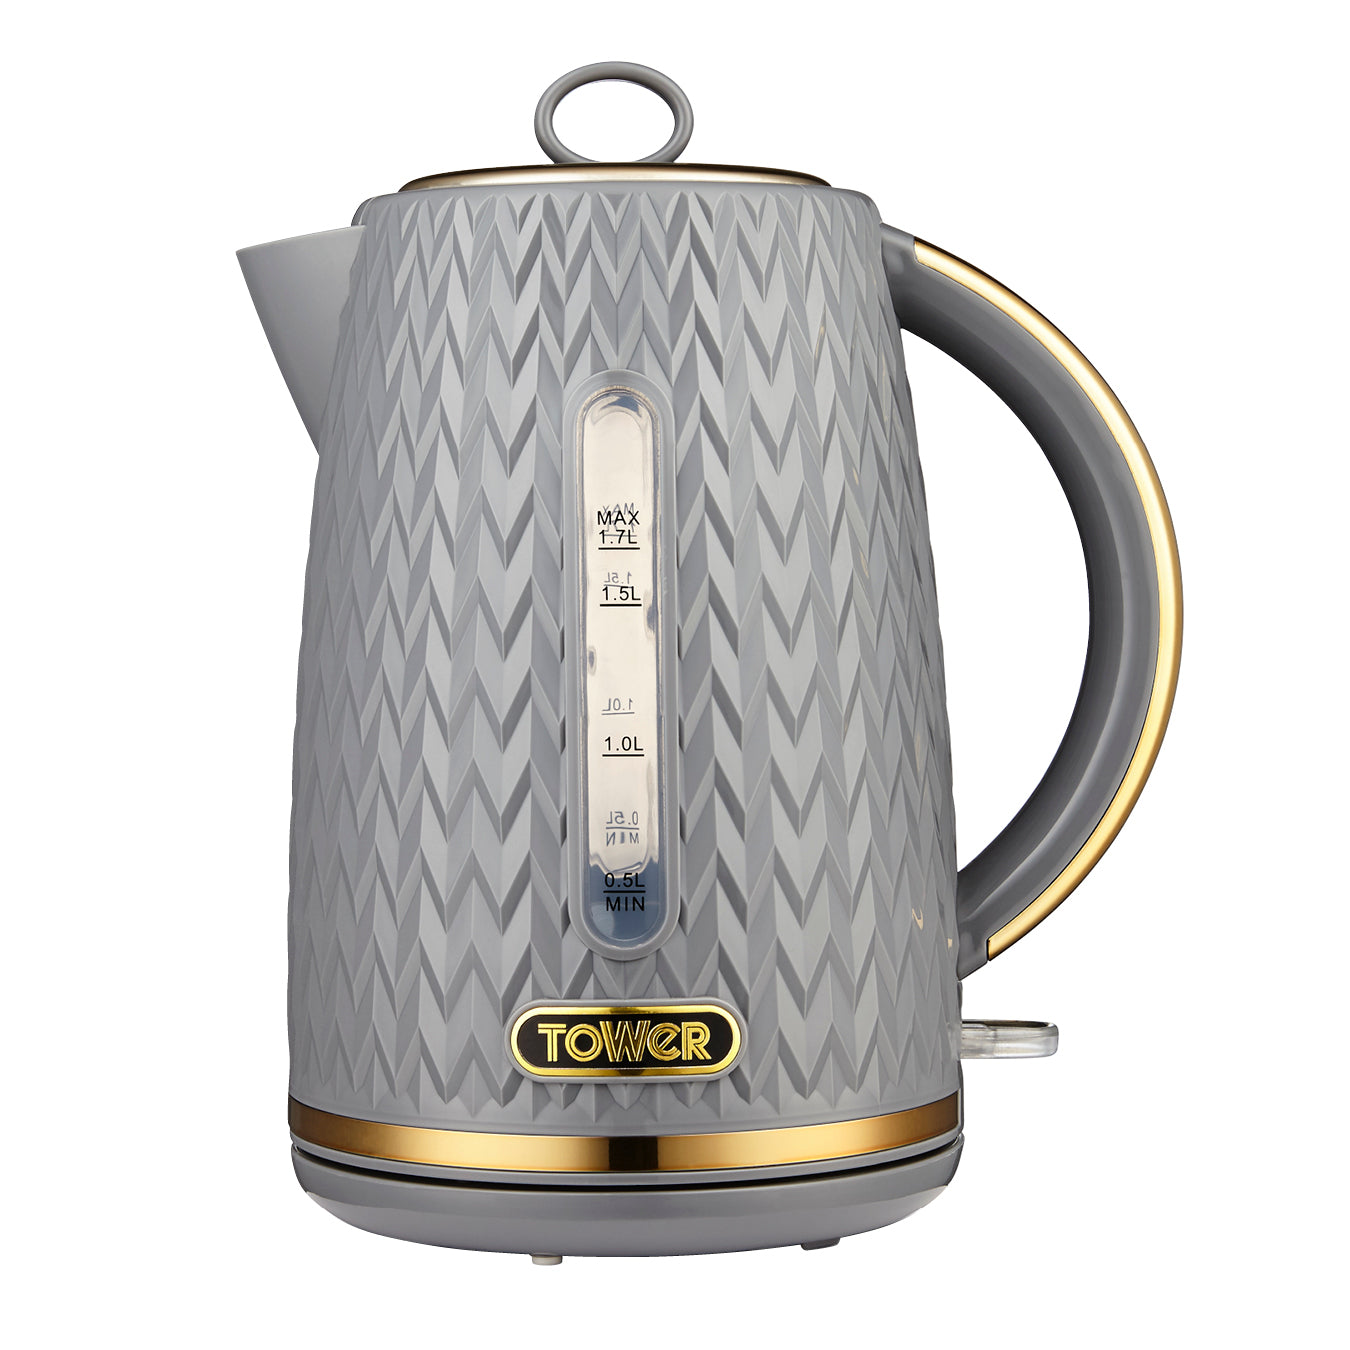 Tower Empire 3KW 1.7L Kettle with Brass Accents - Grey  | TJ Hughes